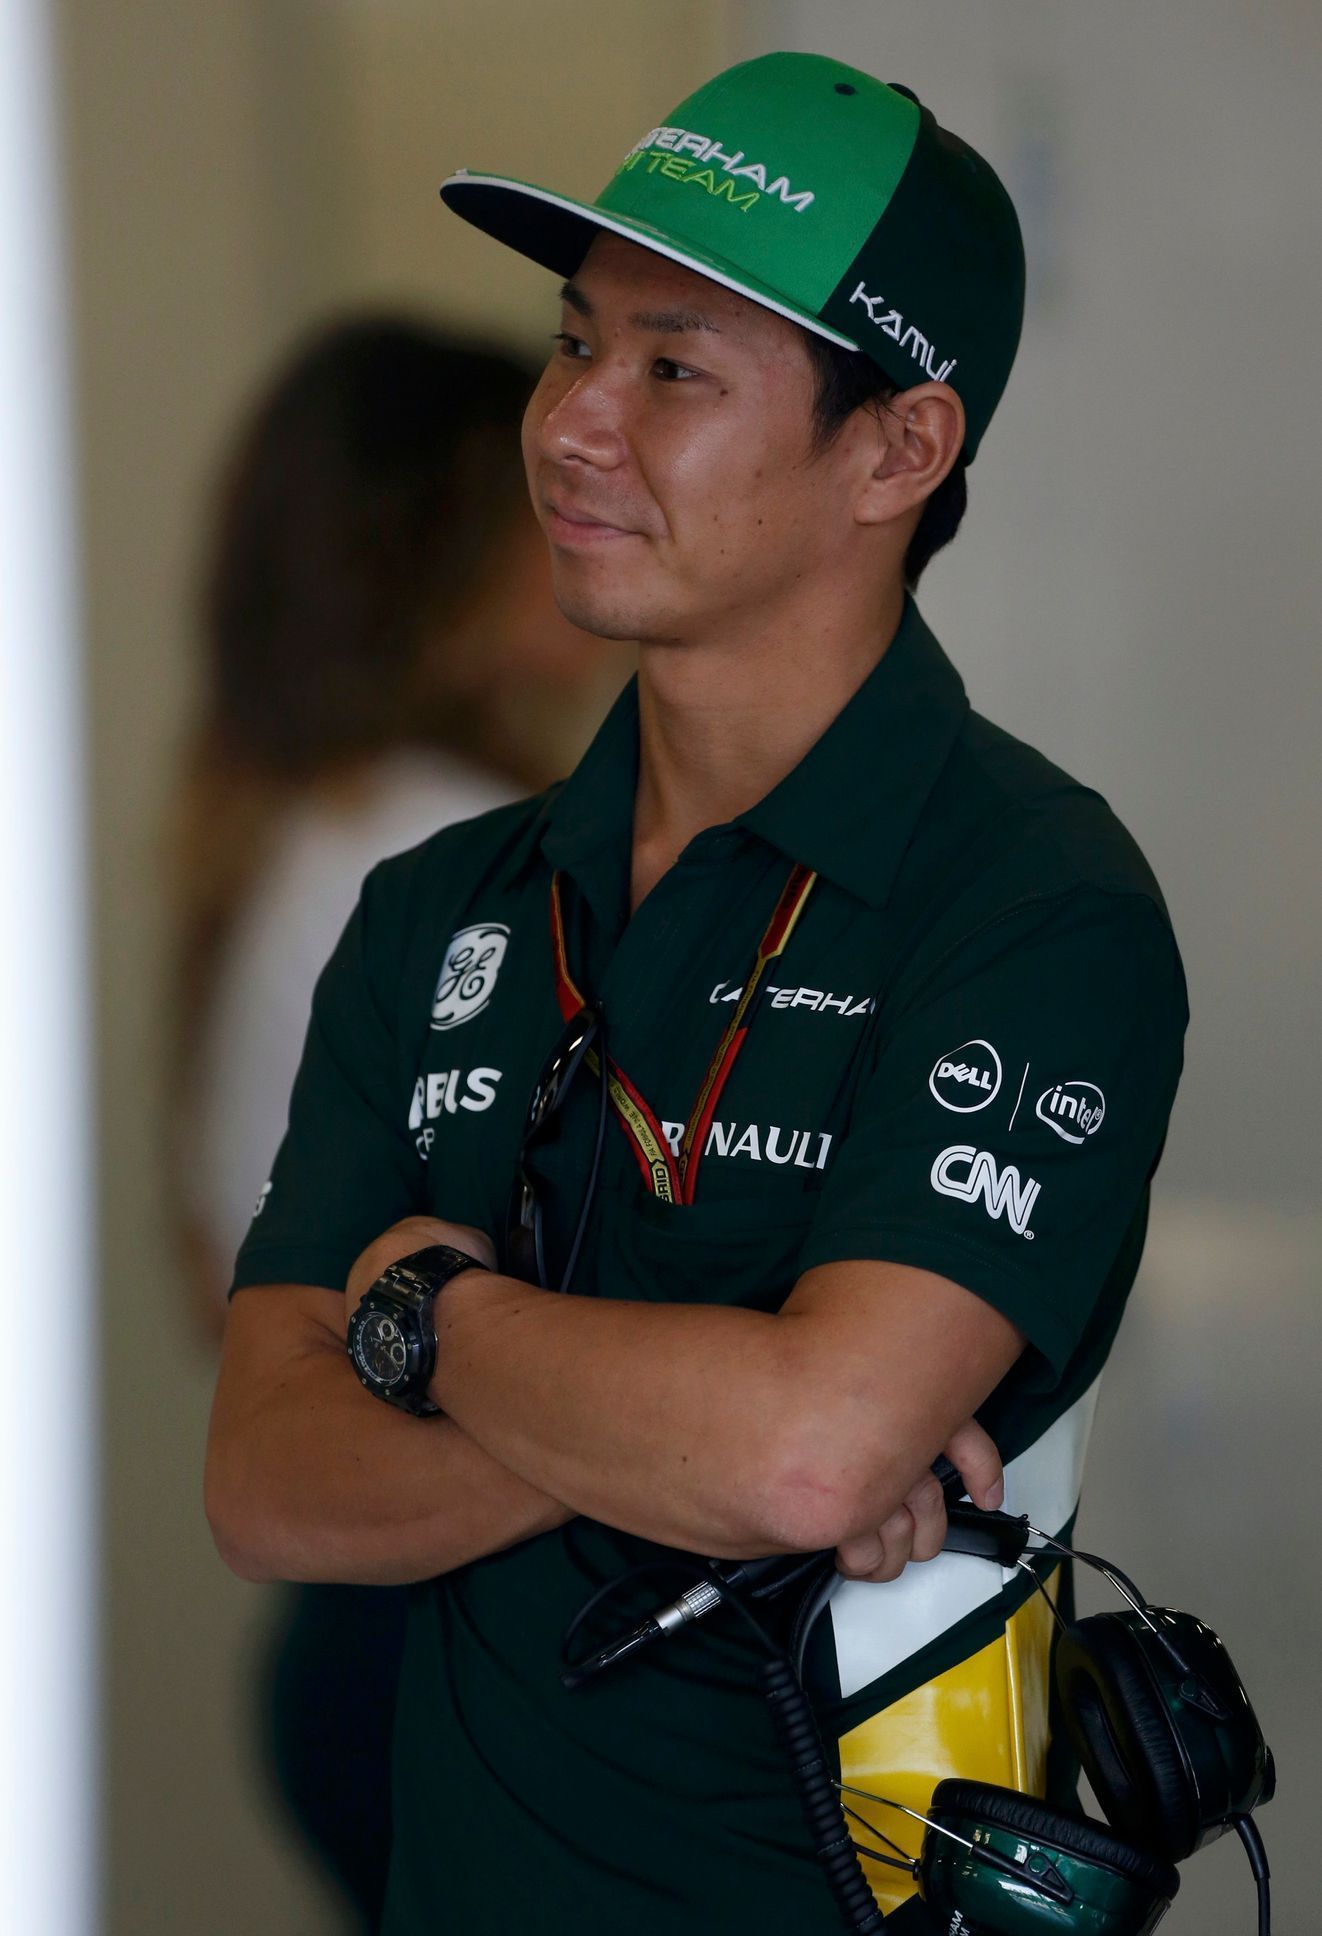 Caterham Formula One driver Kobayashi of Japan looks on in the garage during the second practice session of the Australian F1 Grand Prix in Melbourne